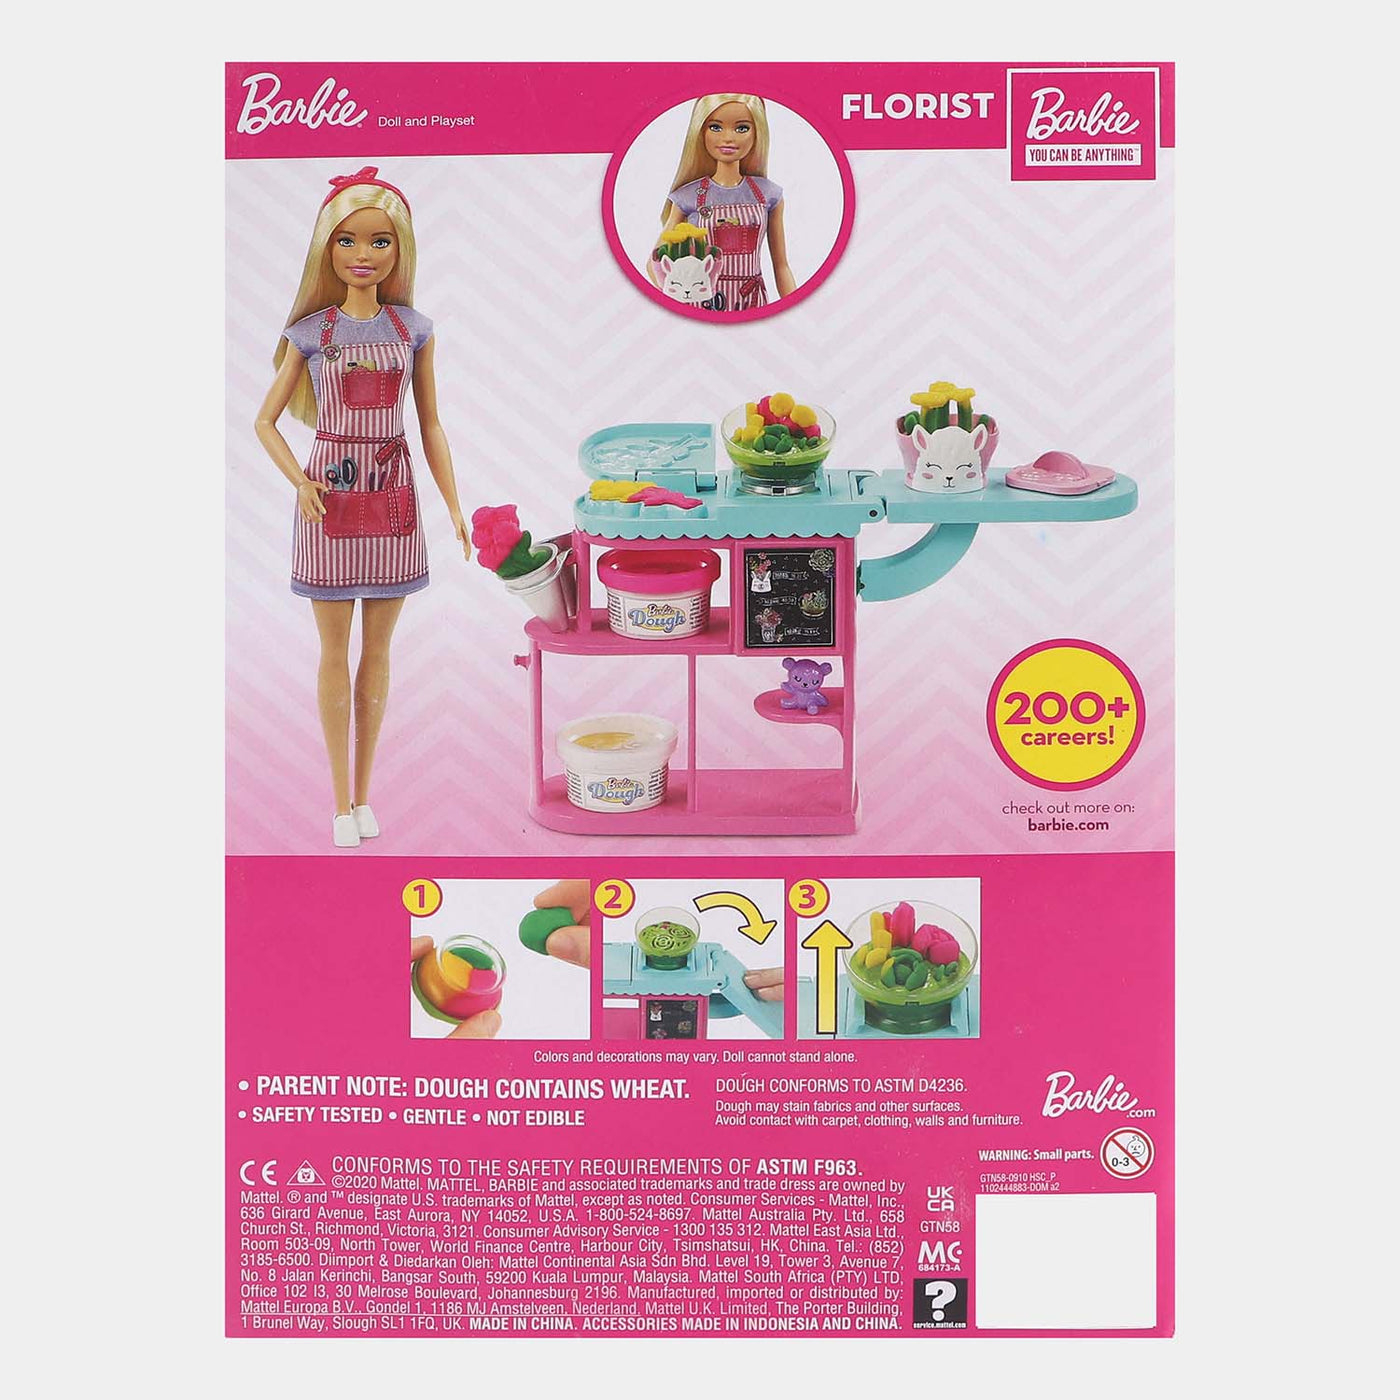 Barbie Doll With Play Dough Set